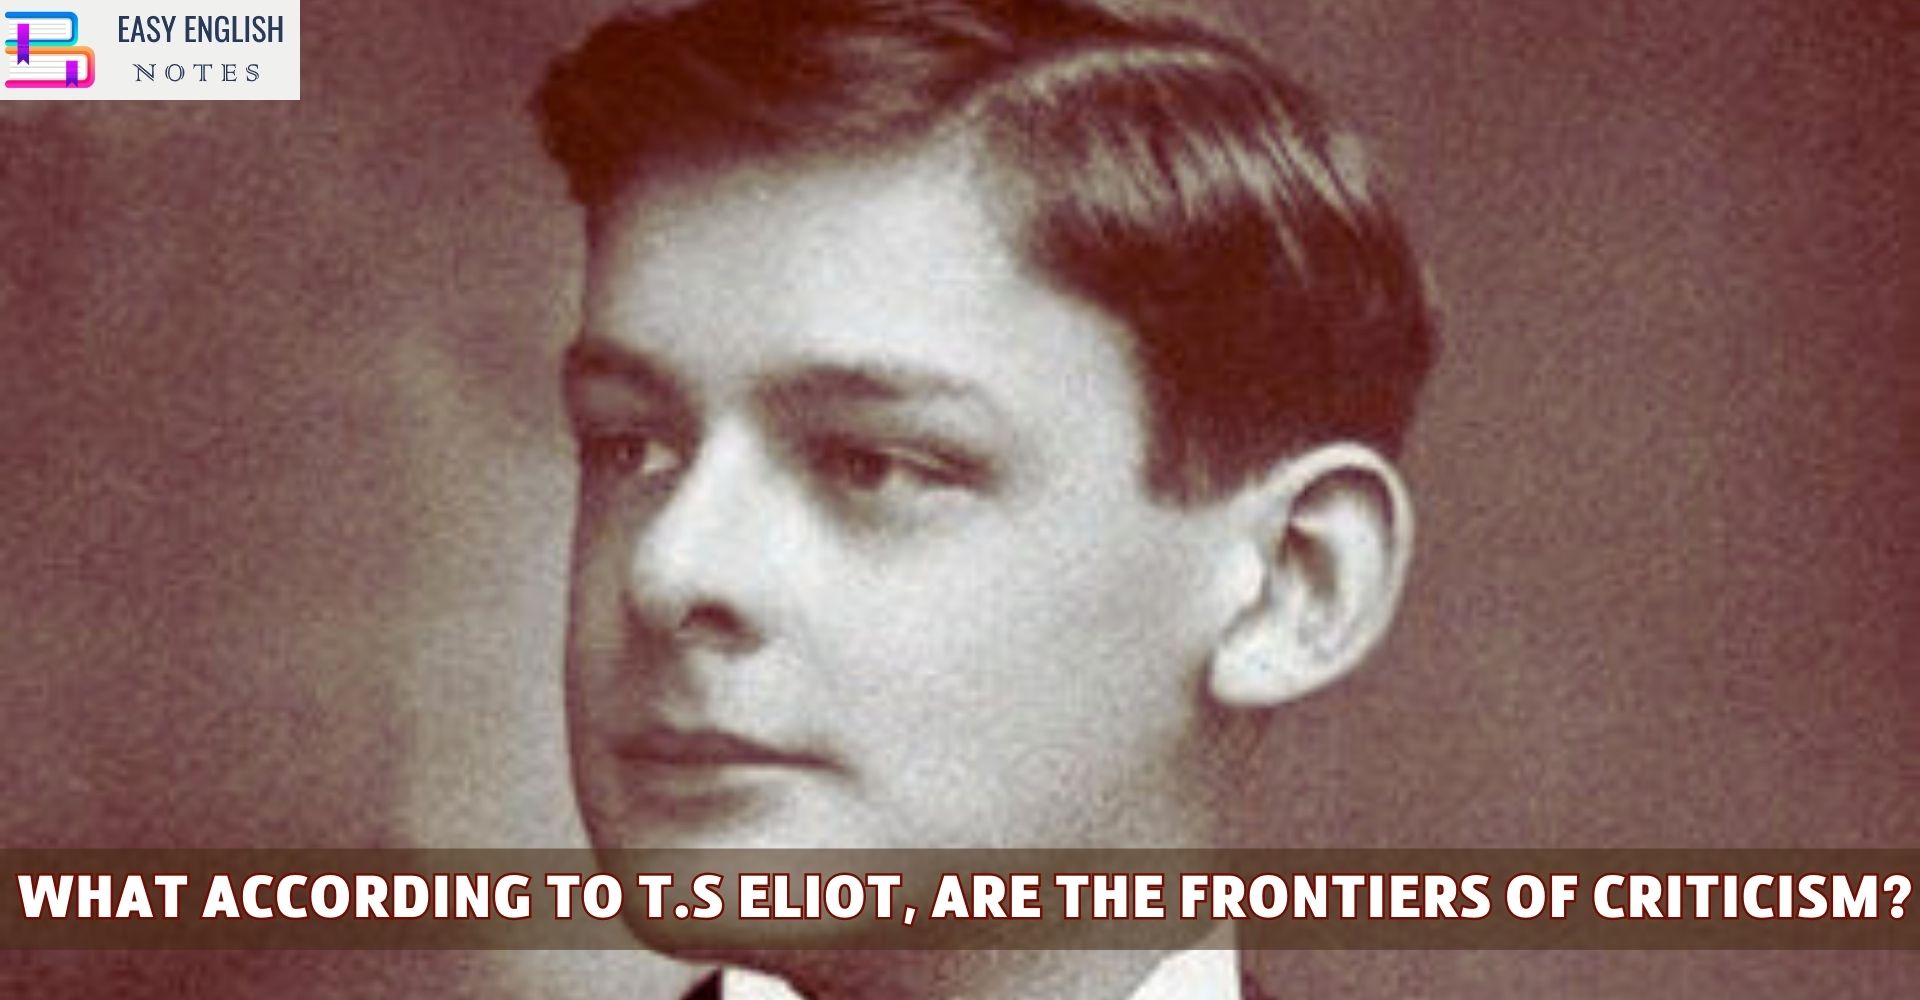 What according to T.S Eliot, are the frontiers of criticism?